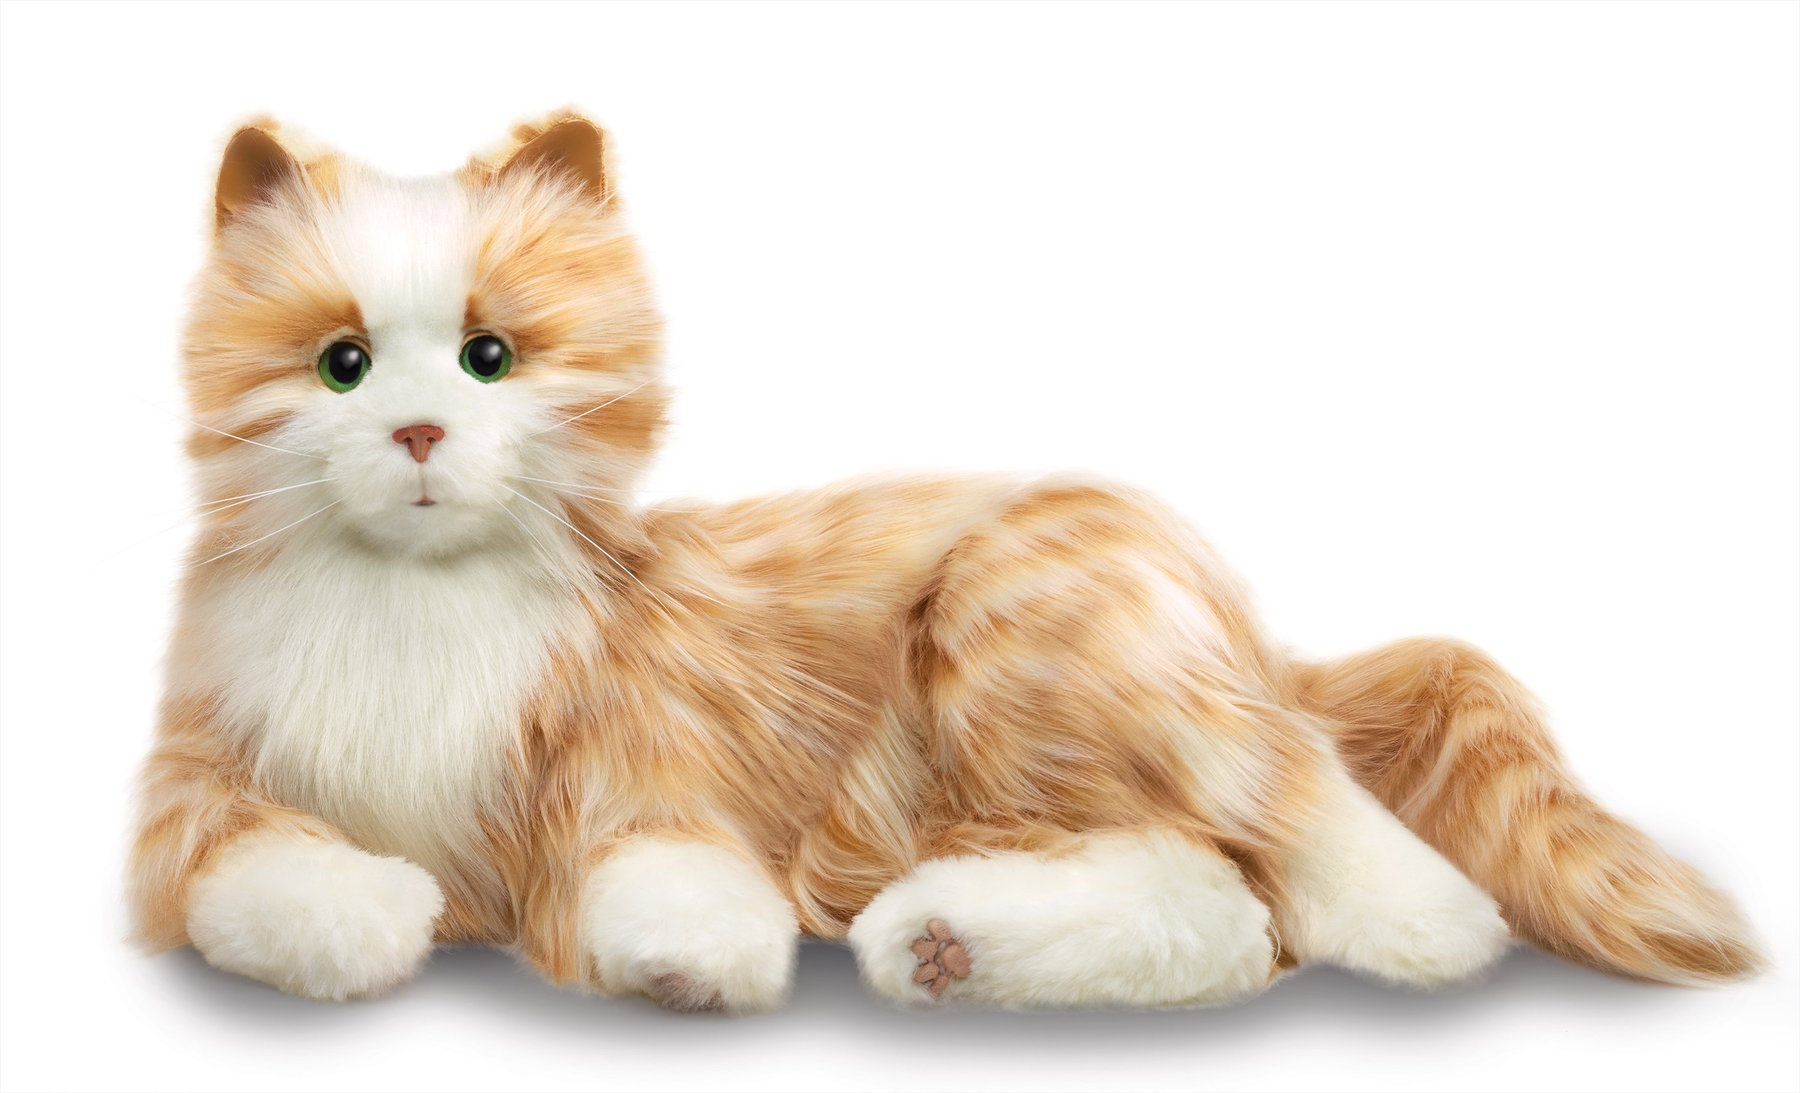 stuffed cat that meows and purrs